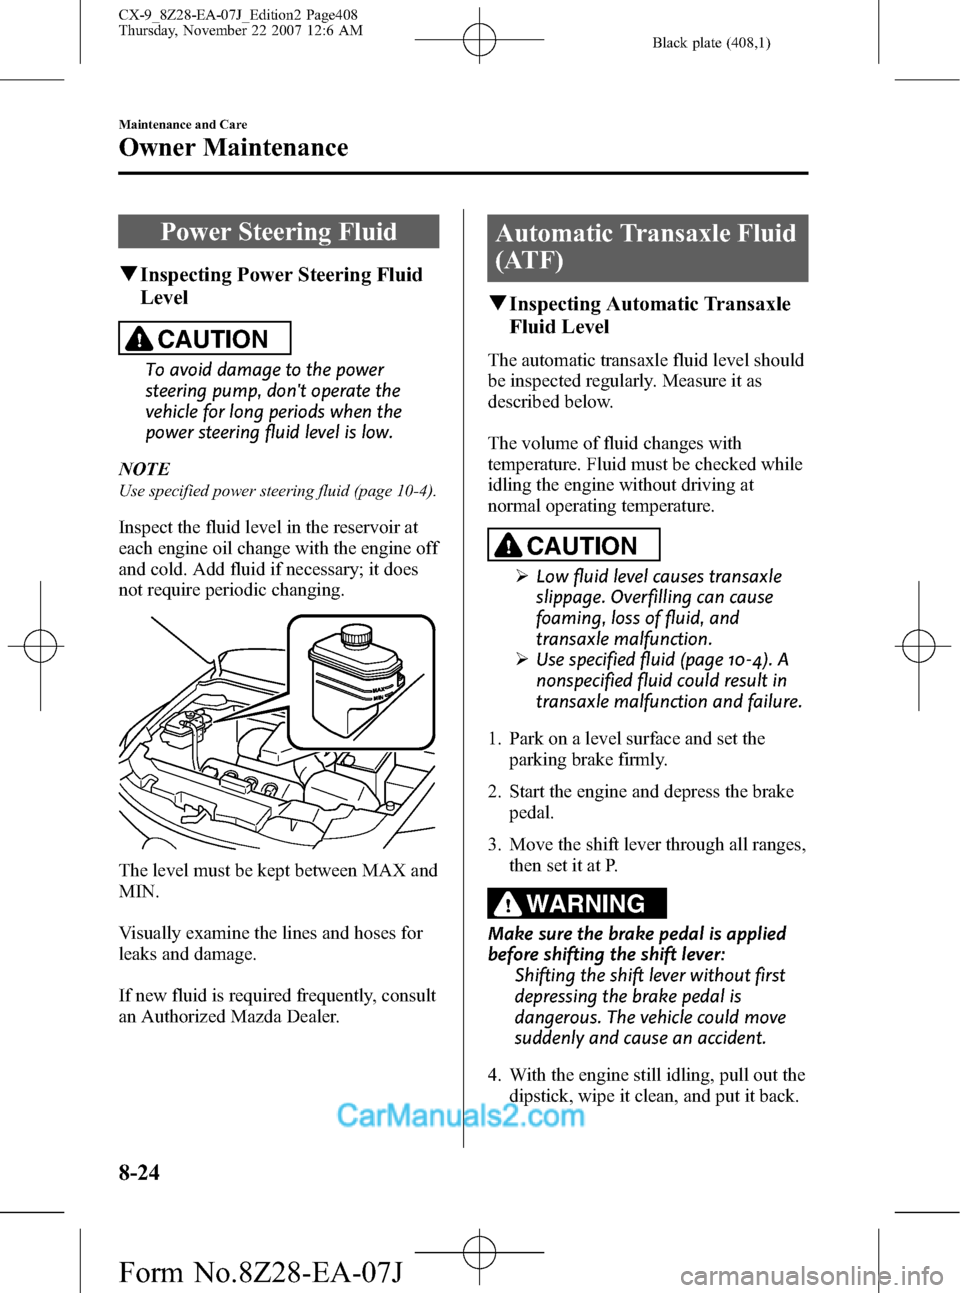 MAZDA MODEL CX-9 2008  Owners Manual (in English) Black plate (408,1)
Power Steering Fluid
qInspecting Power Steering Fluid
Level
CAUTION
To avoid damage to the power
steering pump, dont operate the
vehicle for long periods when the
power steering f